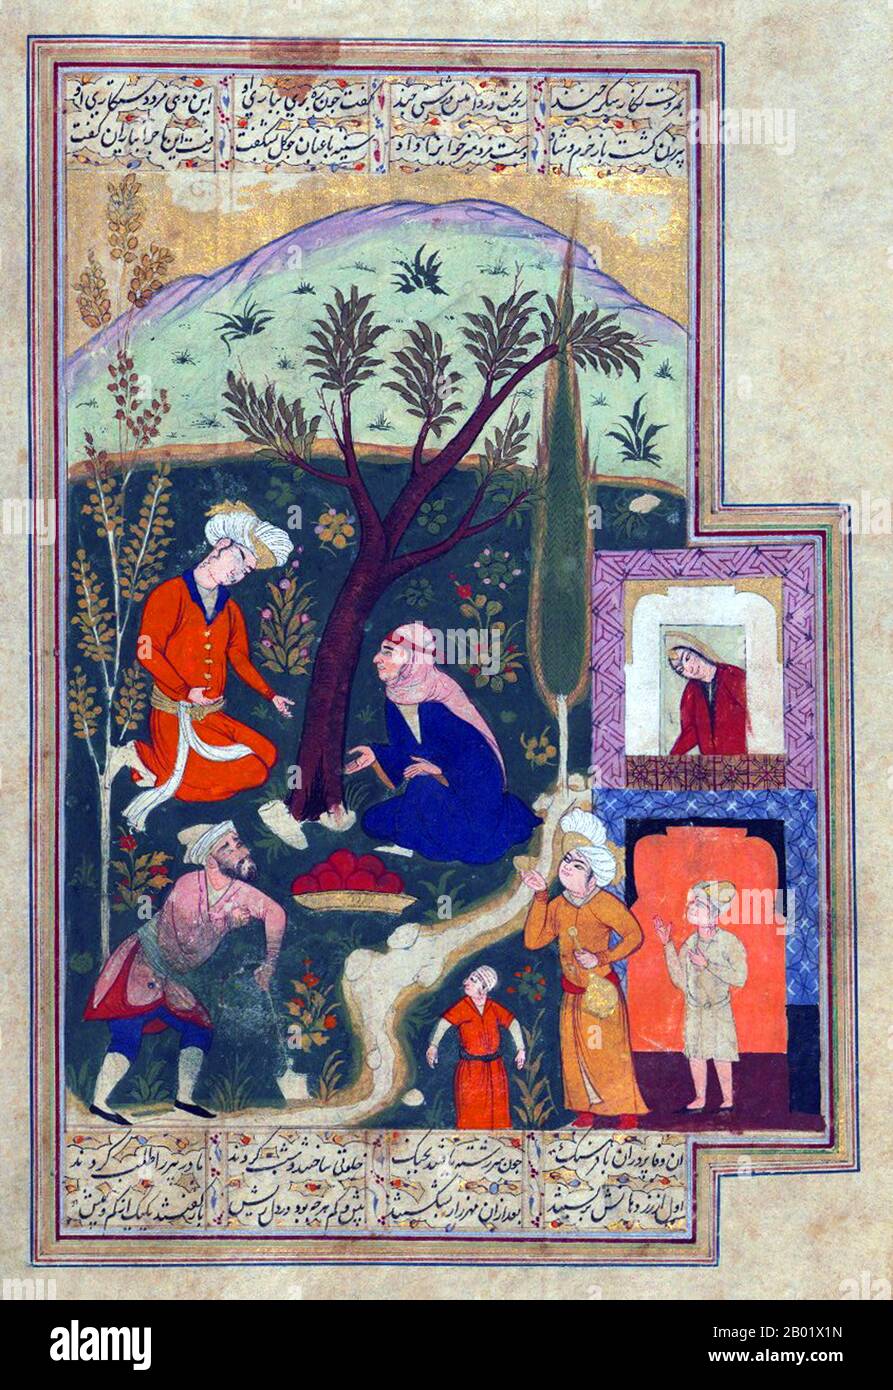 Iran/Persia: Bahram Gur in the Red Pavilion. From a manuscript of Amir Khusraw's Hasht-Bihisht, Safavid Dynasty, 1609.  Bahram V (406-438) was the fourteenth Sassanid King of Persia (r. 421-438). Also called Bahram Gur or Bahramgur, he was a son of Yazdegerd I (r. 399-421), after whose sudden death (or assassination) he gained the crown against the opposition of the grandees by the help of Mundhir, the Arab dynast of al-Hirah. Stock Photo